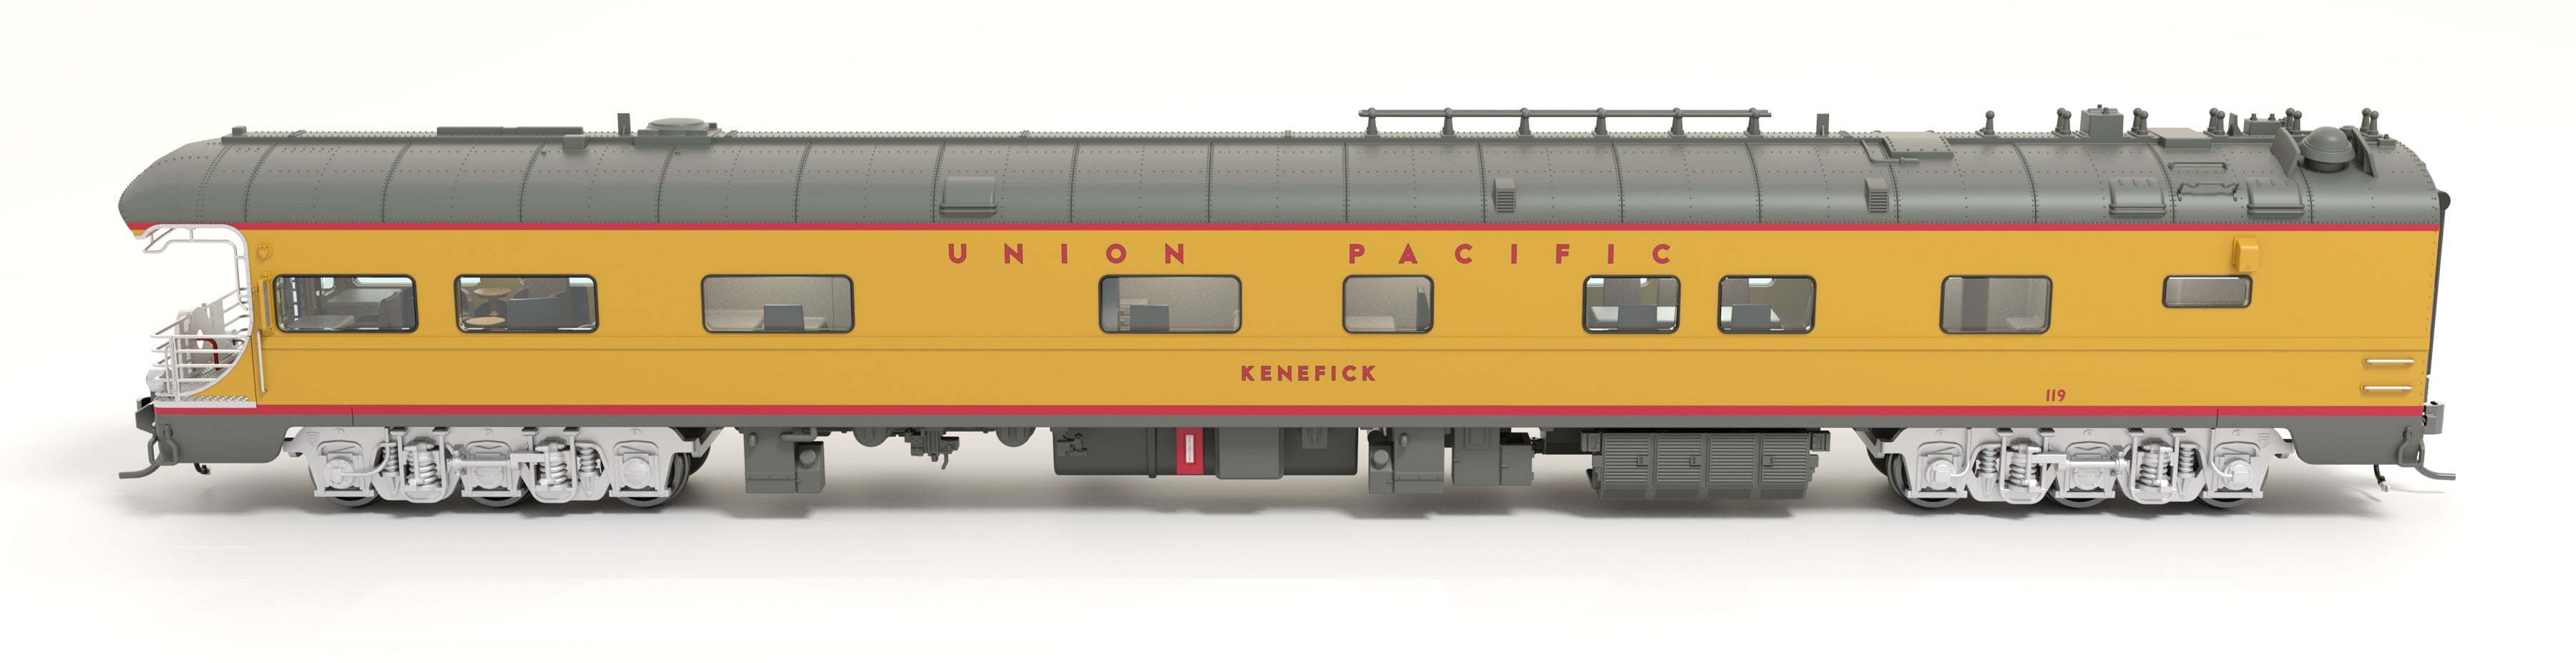 9013 Union Pacific Business Car, UP #119 "Kenefick", "Big Boy Tour" Drumhead, HO Scale